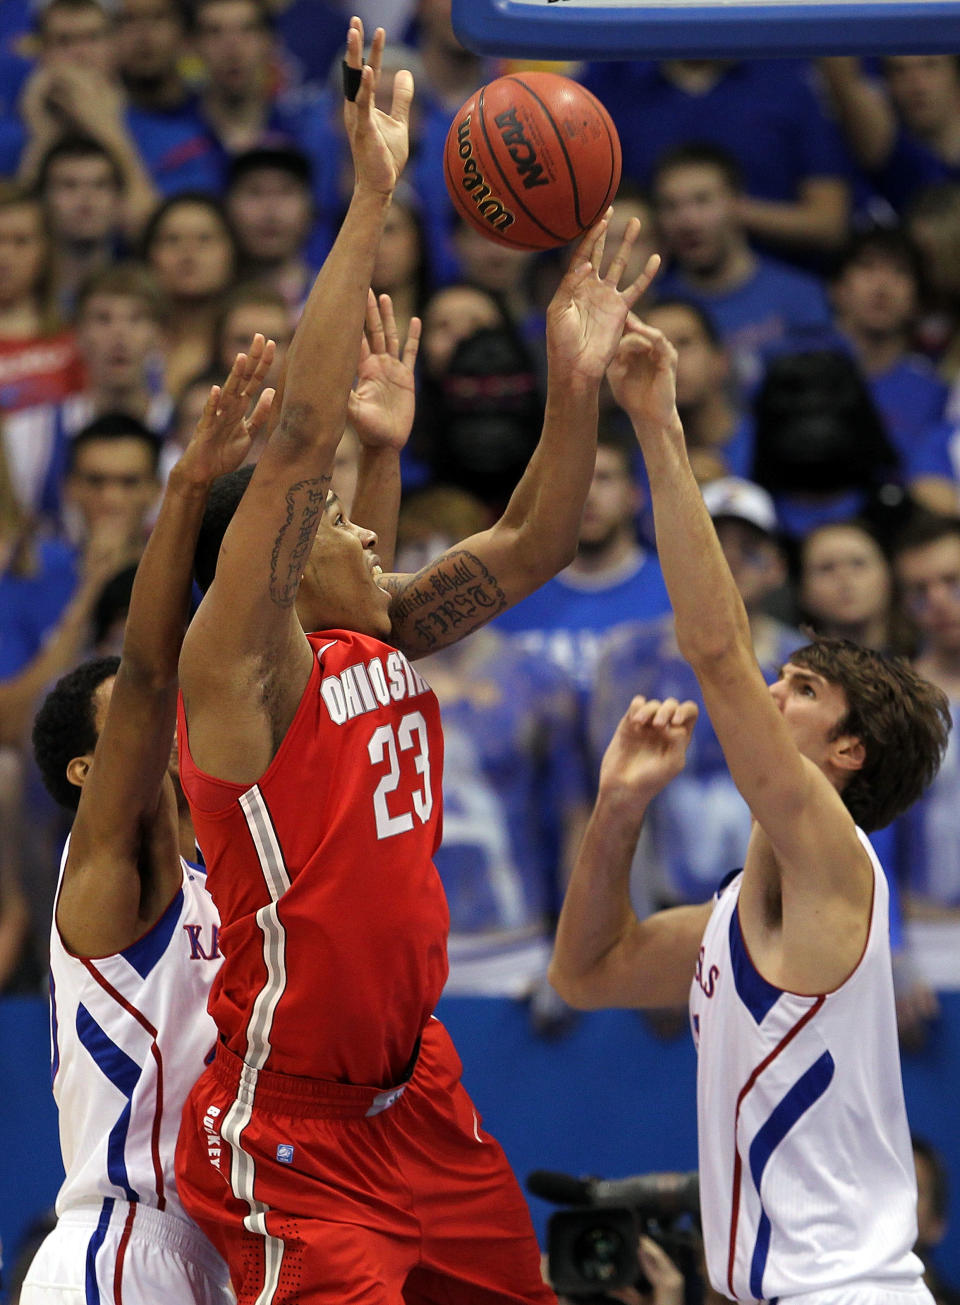 LAWRENCE, KS - DECEMBER 10: Jeff Withey #5 of the Kansas Jayhawks blocks a shot by Amir Williams #23 of the Ohio State Buckeyes during the game on December 10, 2011 at Allen Fieldhouse in Lawrence, Kansas. (Photo by Jamie Squire/Getty Images)